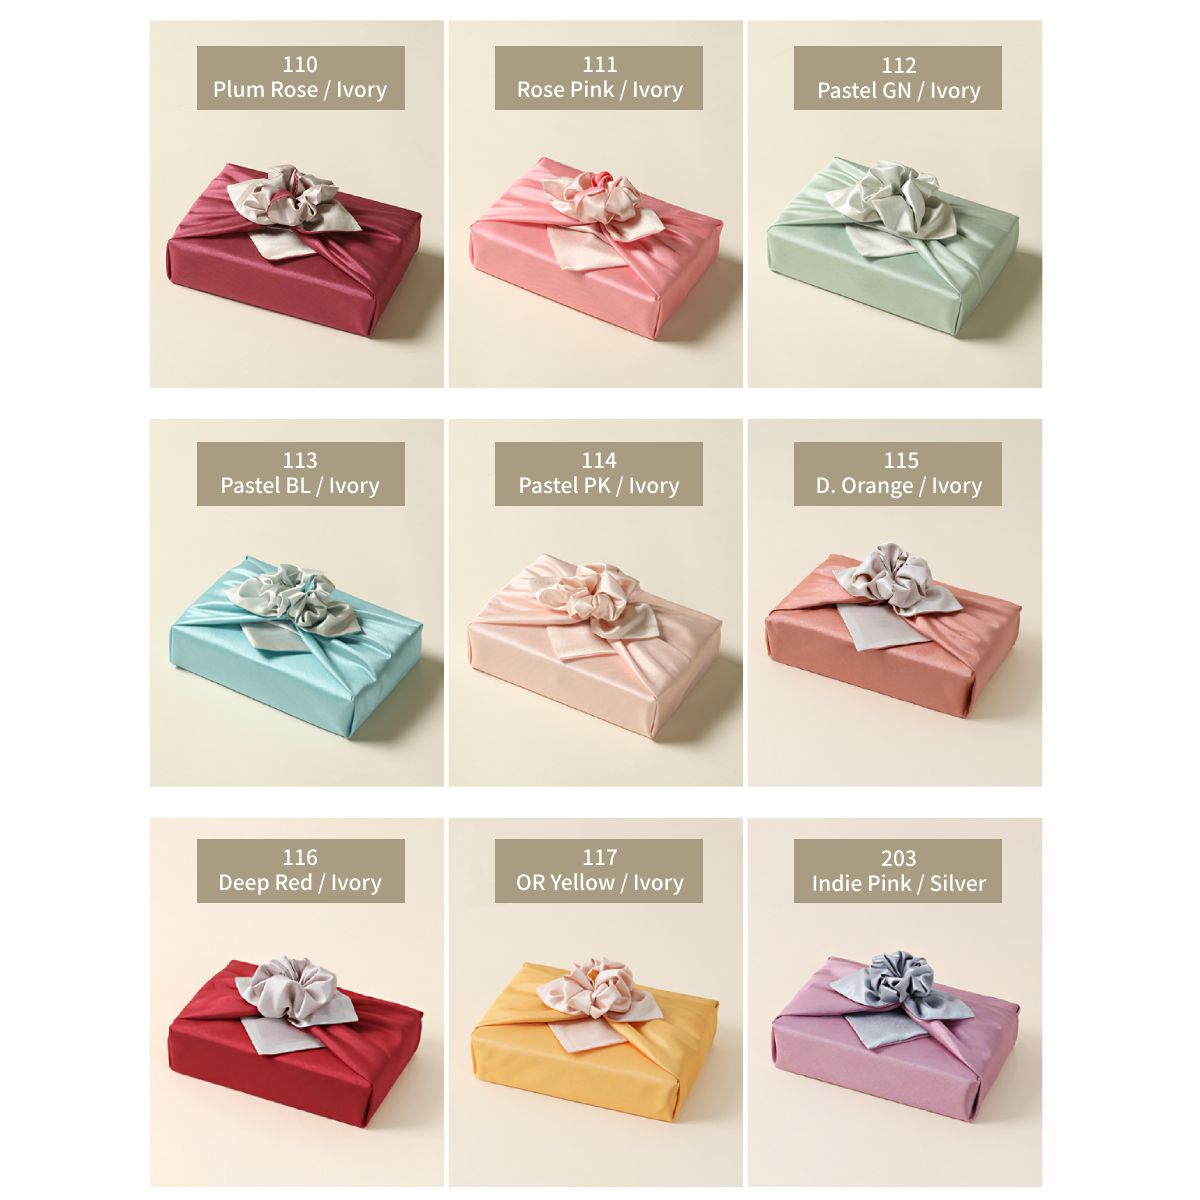 nine double-sided color of Bojagi. the first row:plum rose&ivory,rose pink&ivory,pastel green&ivory. the second row:pastel blue&ivory,pastel pink&ivory,dark orange&ivory. the third row:deep red&ivory,orange yellow&ivory,indie pink&silver.